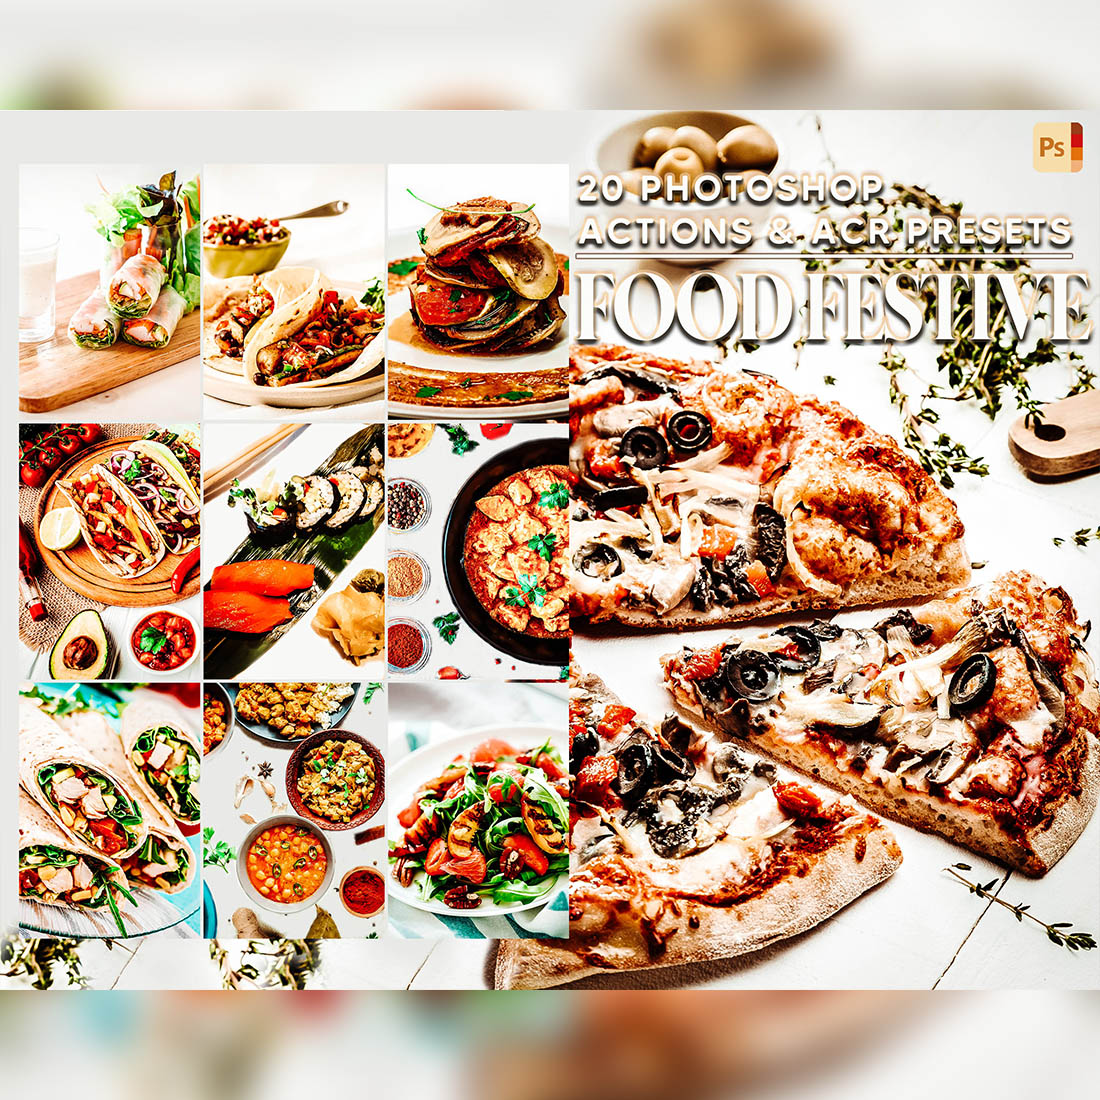 20 Photoshop Actions, Food Festive Ps Action, Bright ACR Preset, Vibrant Ps Filter, Atn Portrait And Lifestyle Theme For Instagram, Blogger cover image.